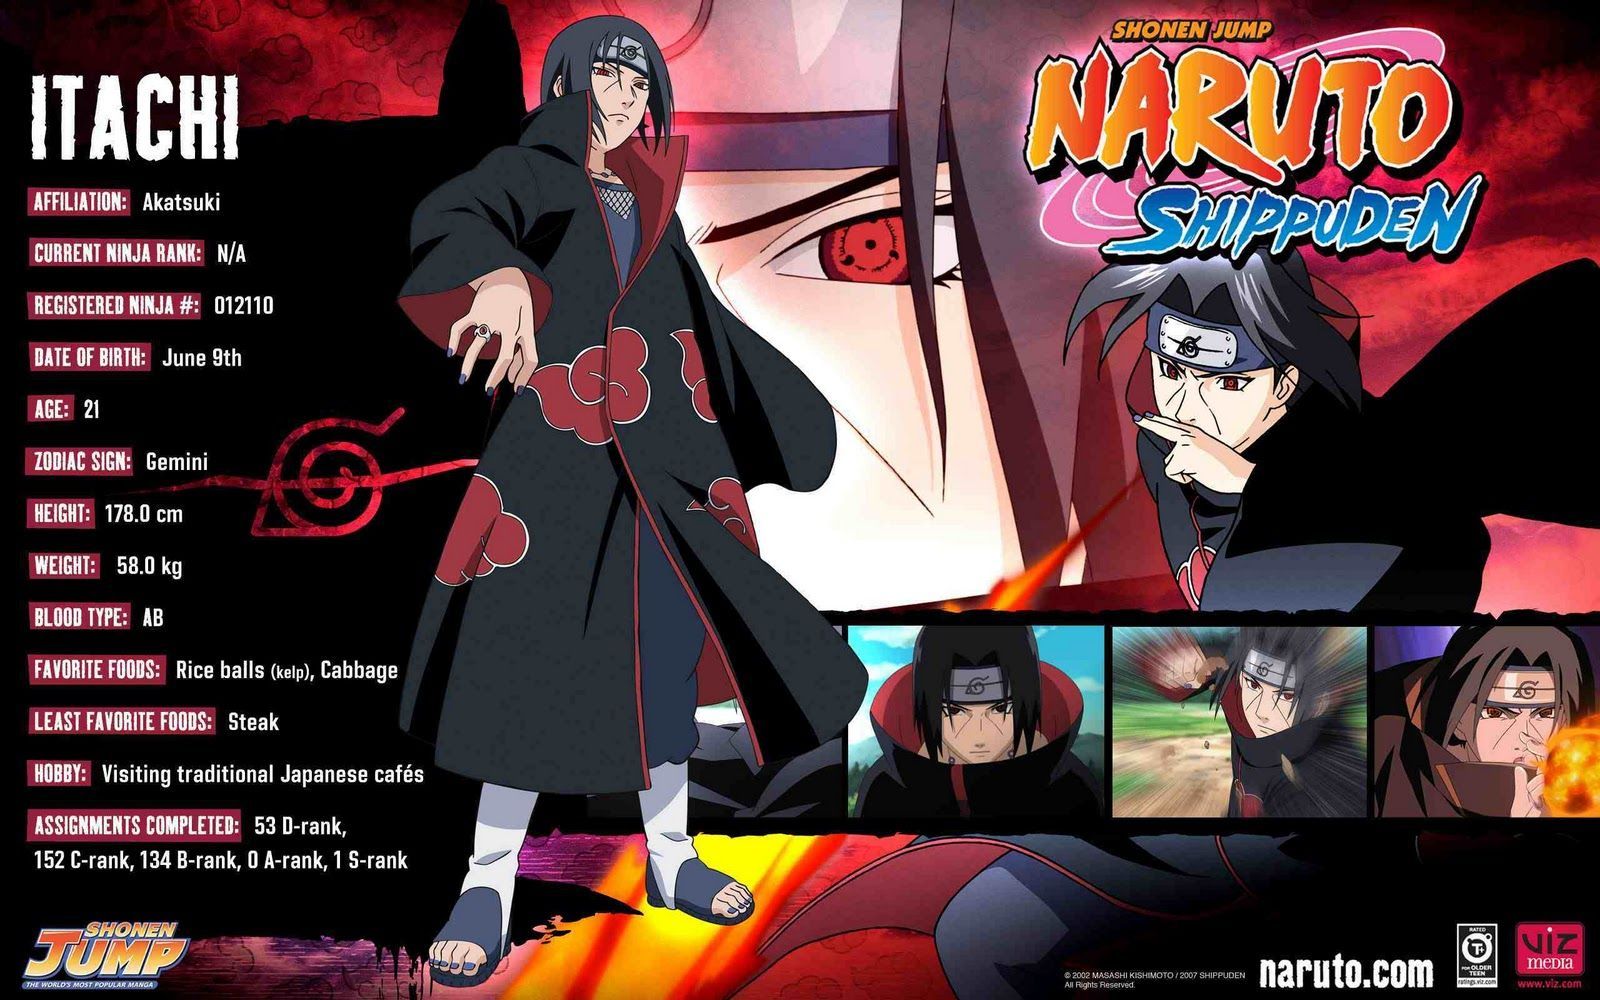 Naruto Shippuden wallpapers HD | Wallpapers, Backgrounds, Images ...